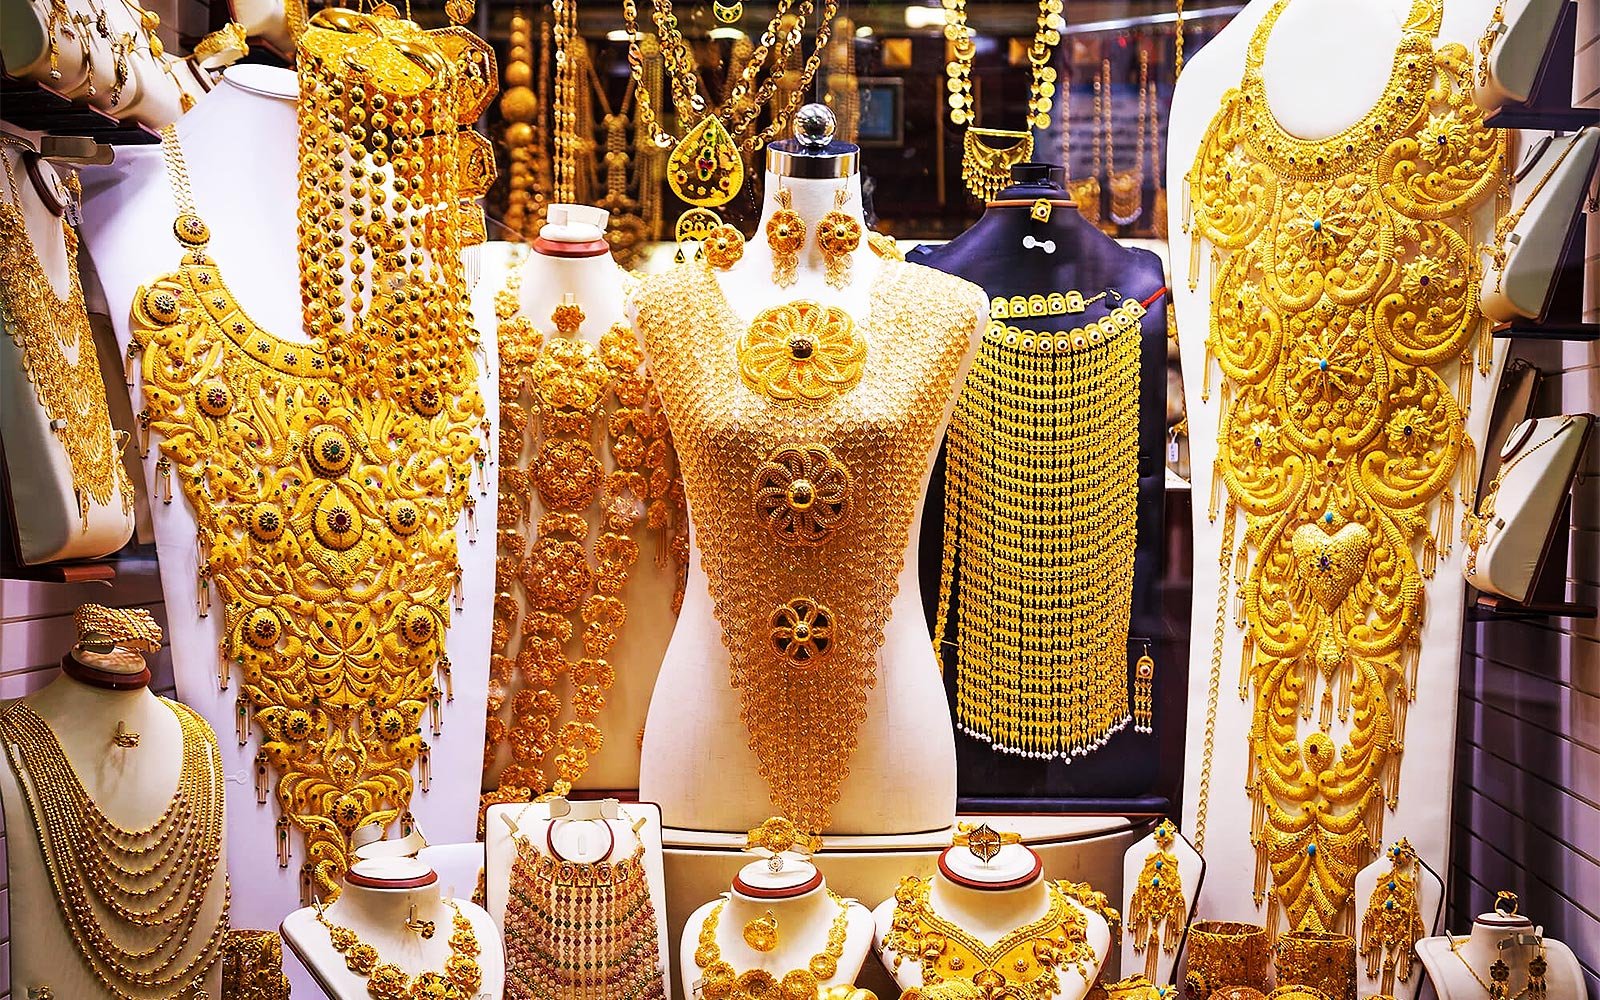 How to see zillions of gold jewelries at Dubai Gold Souk in Dubai